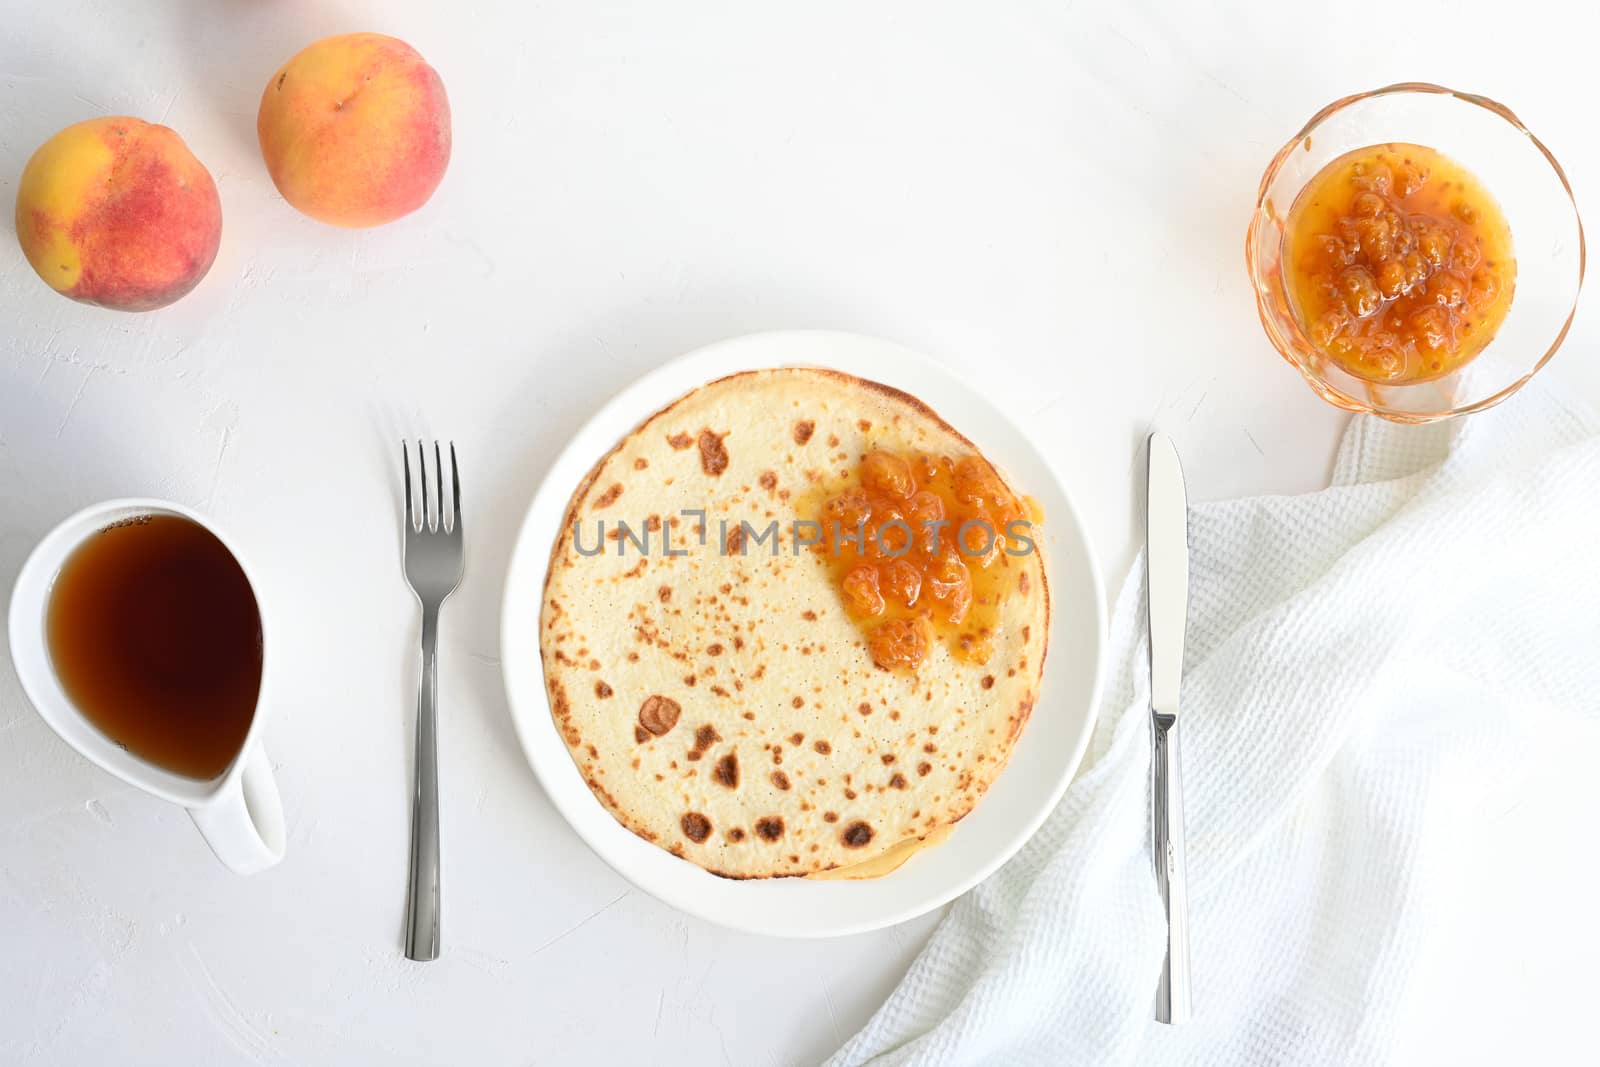 large pancakes with jam, tea and peaches on white background.